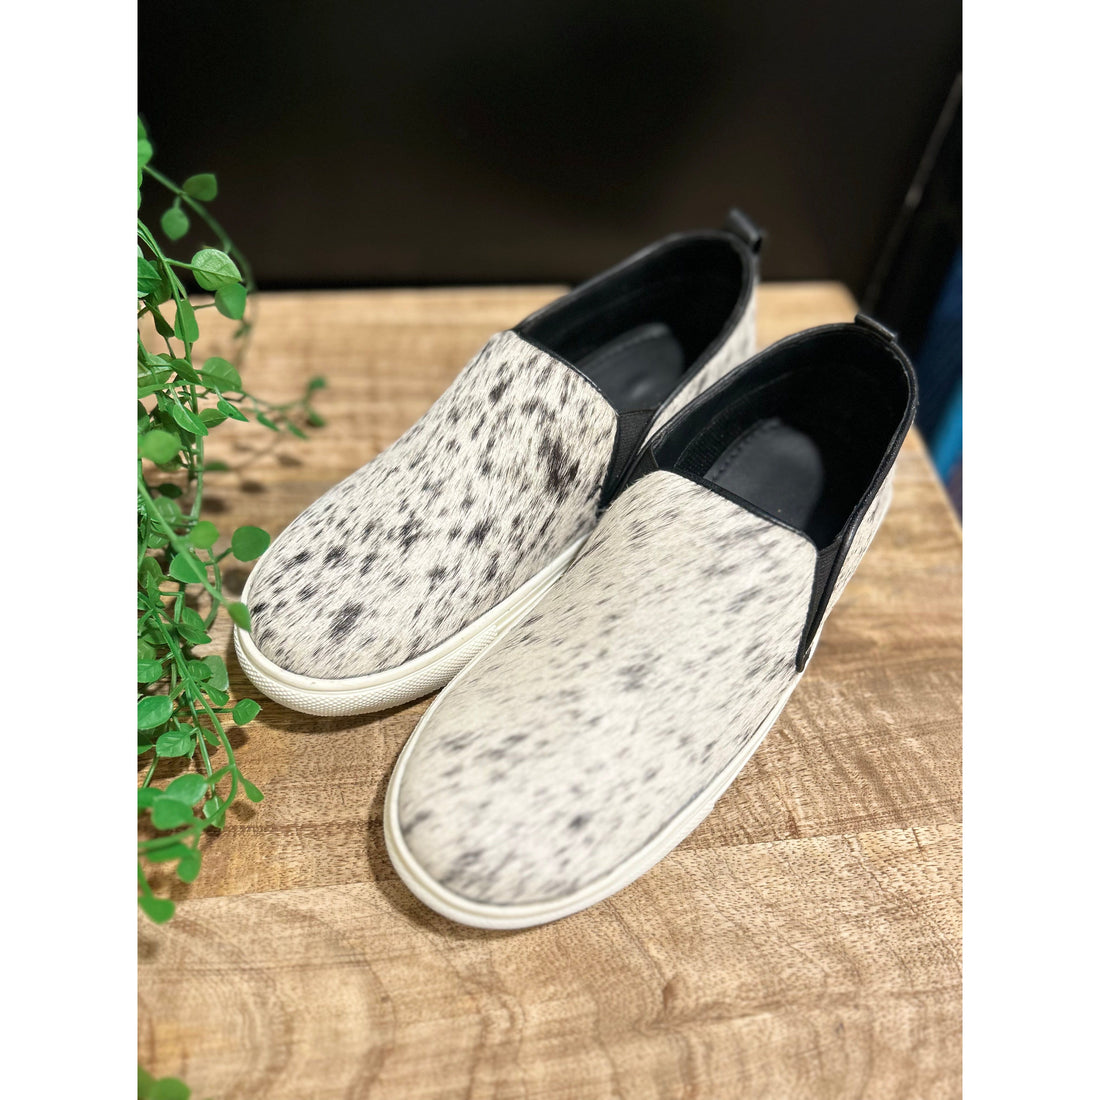 Slip on Black and White Shoes Size 37 